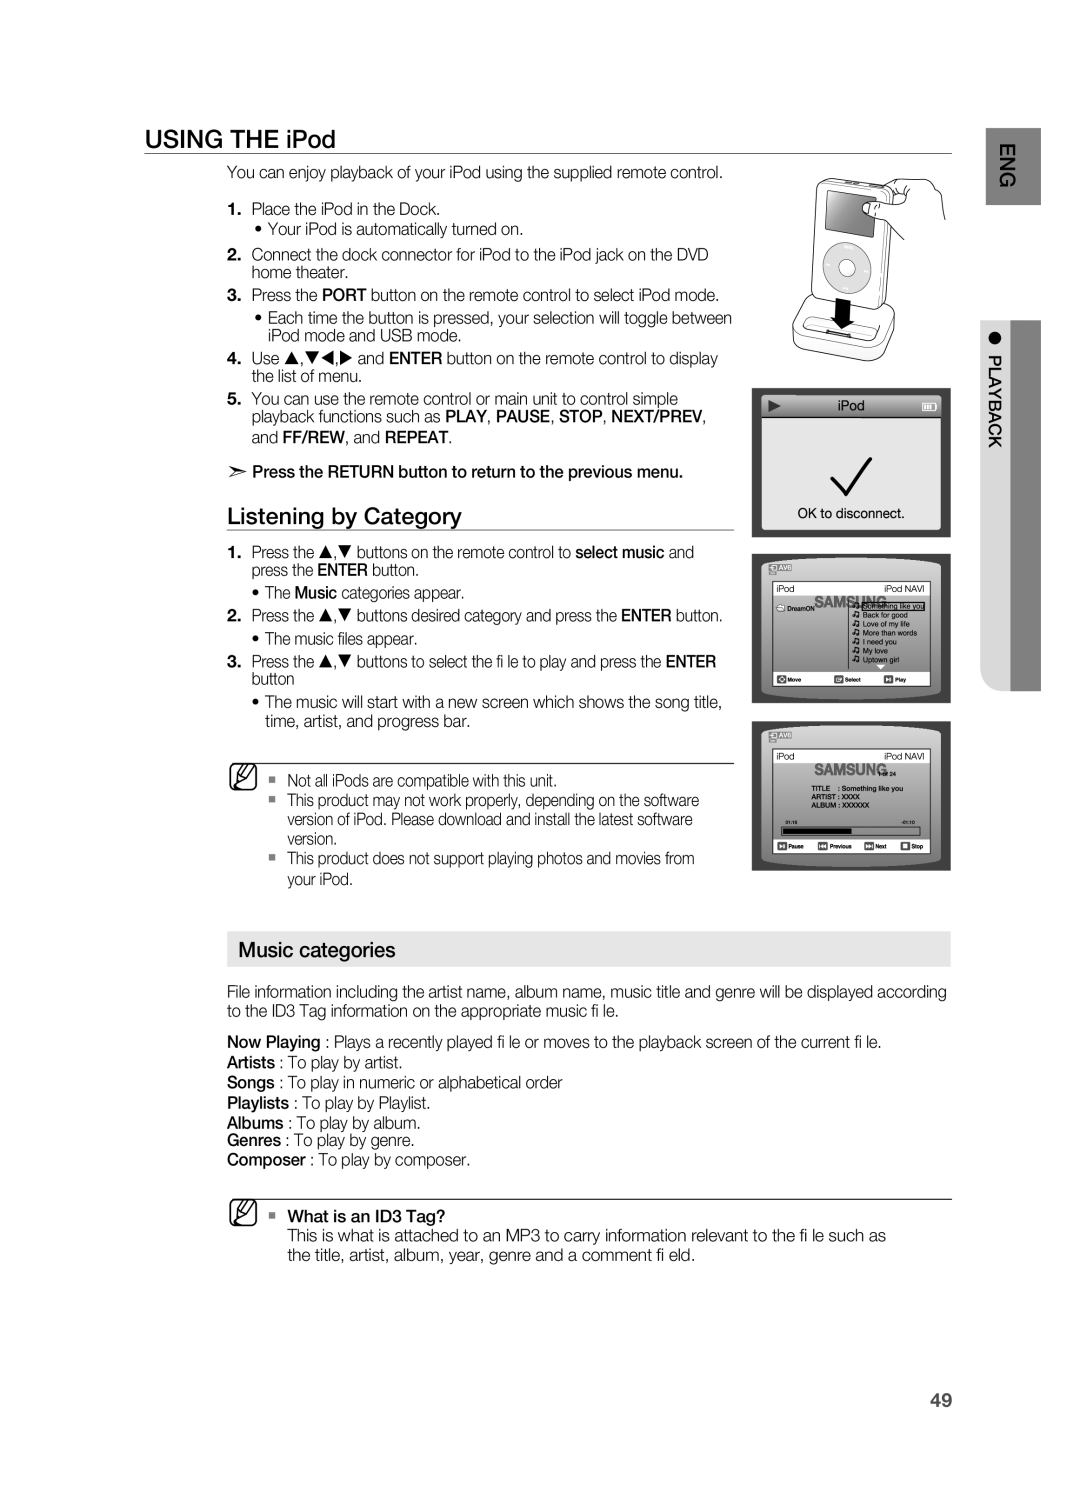 Samsung HT-TZ515 user manual USINg THE iPod, Listening by Category, Music categories 